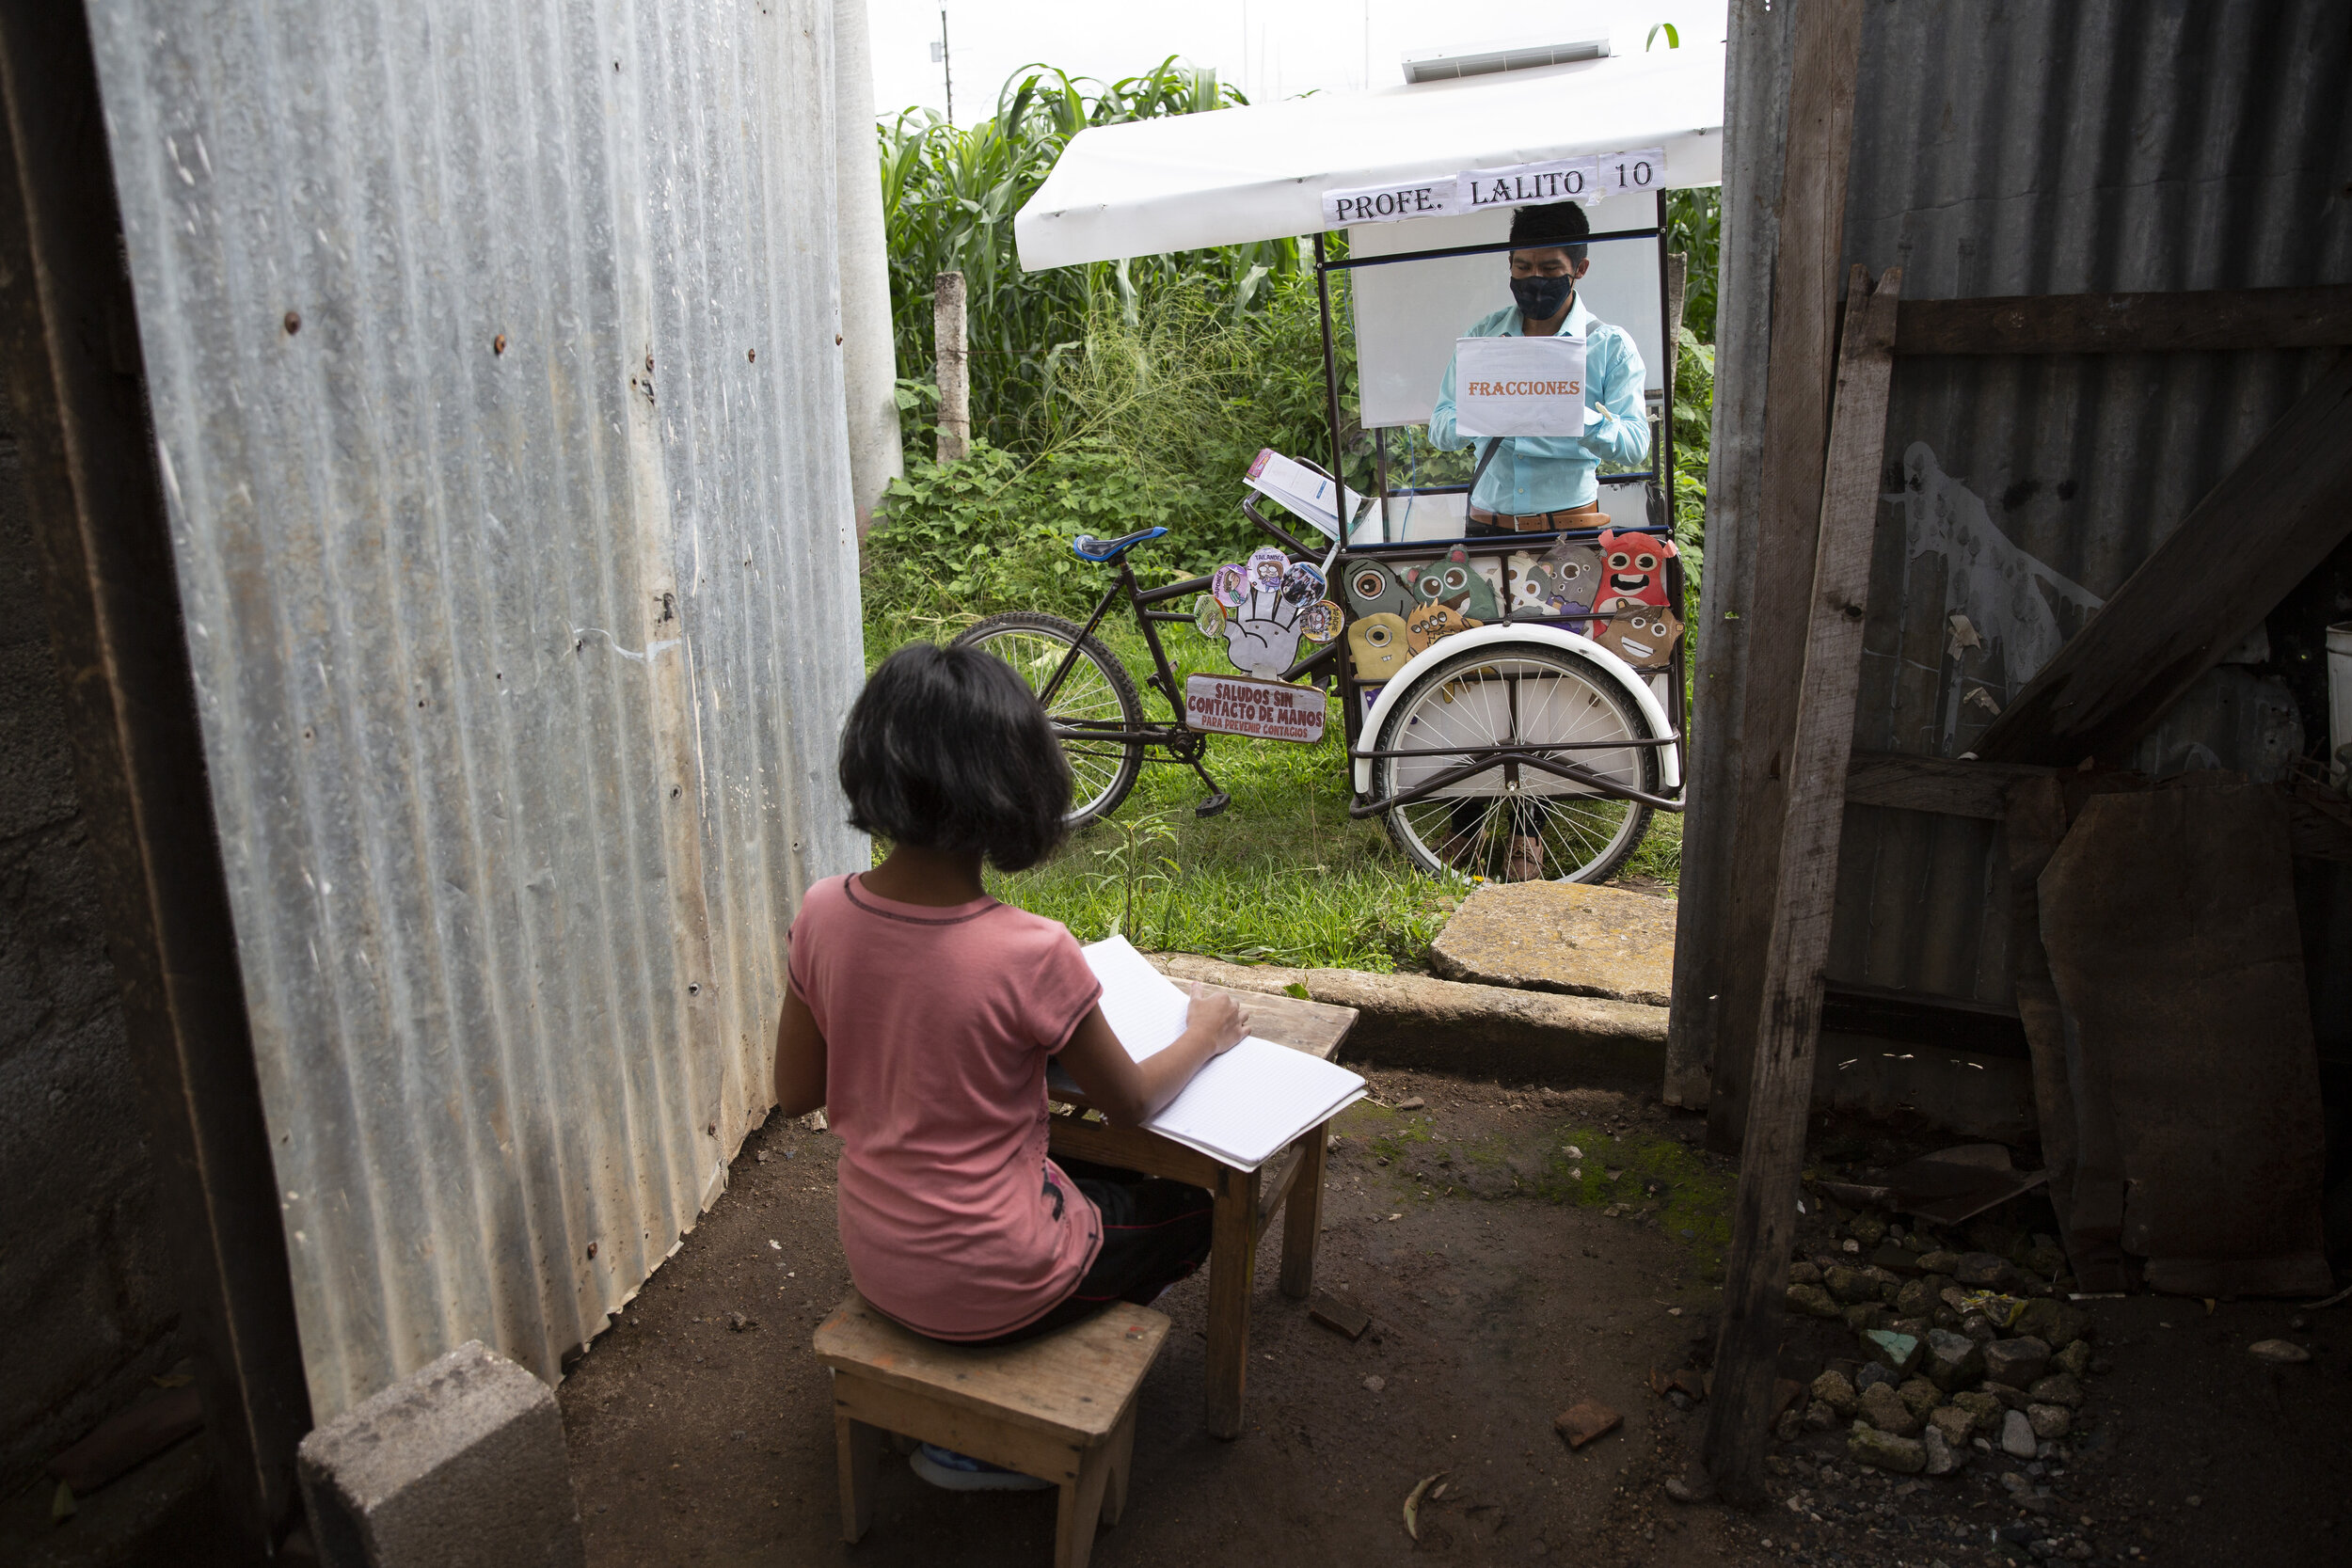  Gerardo Ixcoy teaches 12-year-old student Paola Ximena Conoz about fractions from his mobile classroom, parked outside her home in Santa Cruz del Quiche, Guatemala, Wednesday, July 15, 2020. Each day the 27-year-old sets out pedaling among the cornf